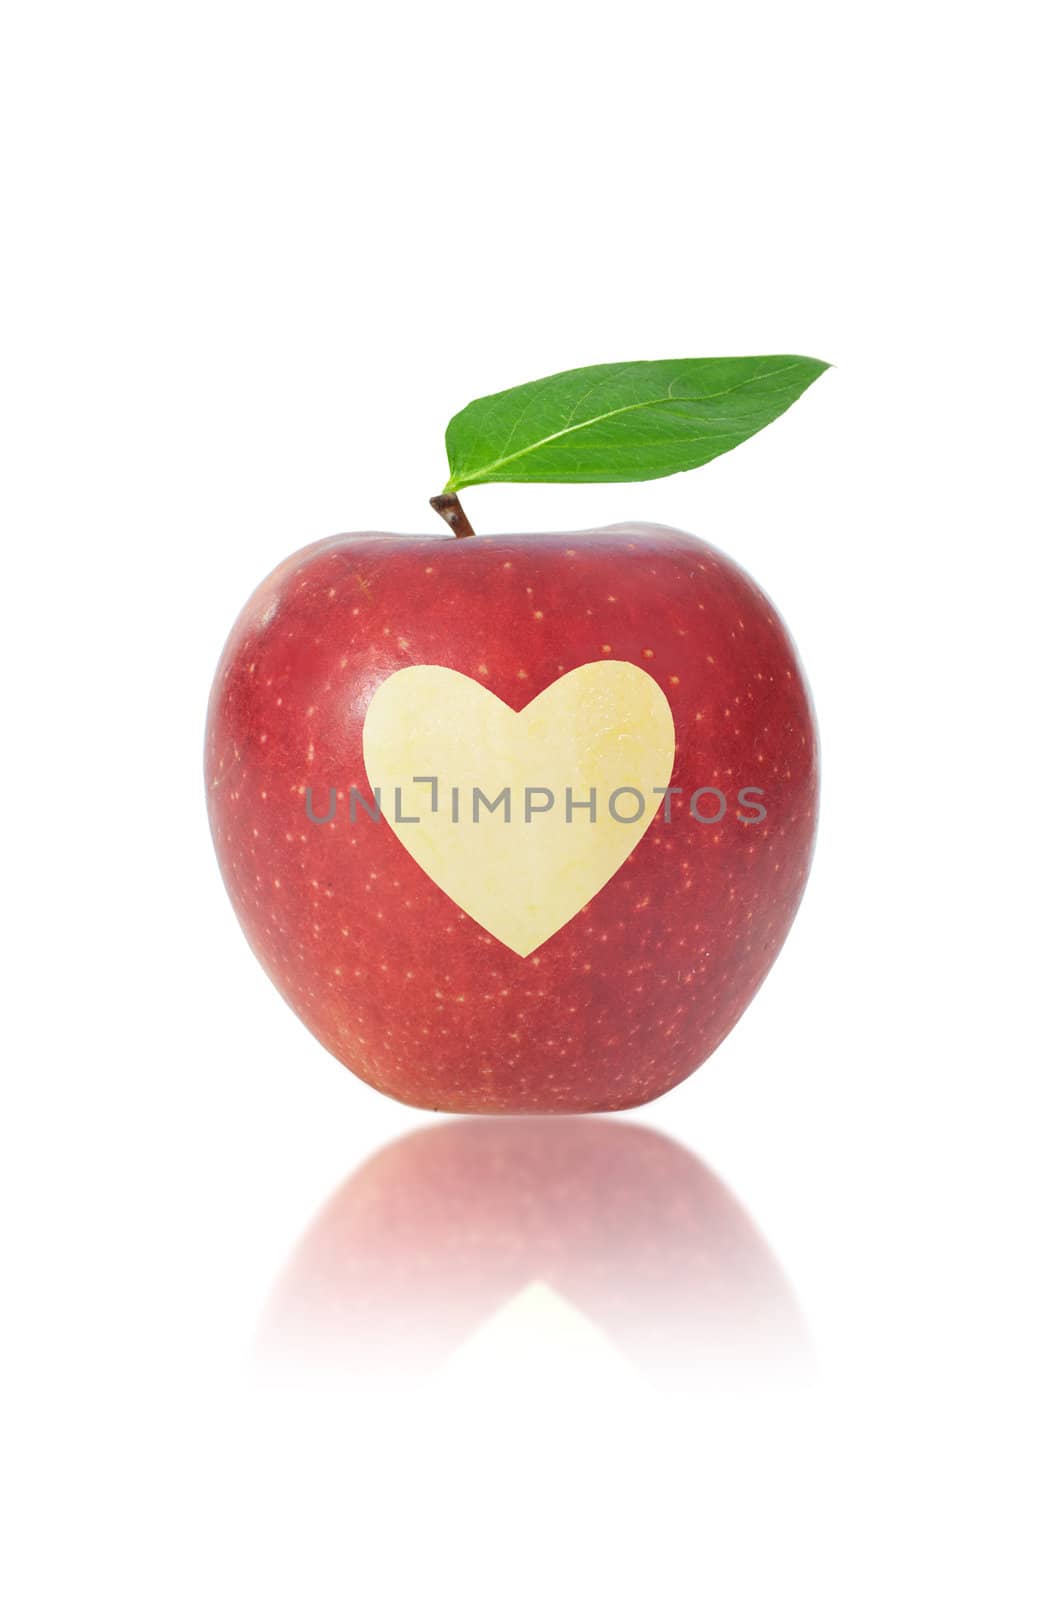 Red apple with a heart shape carved in the middle 